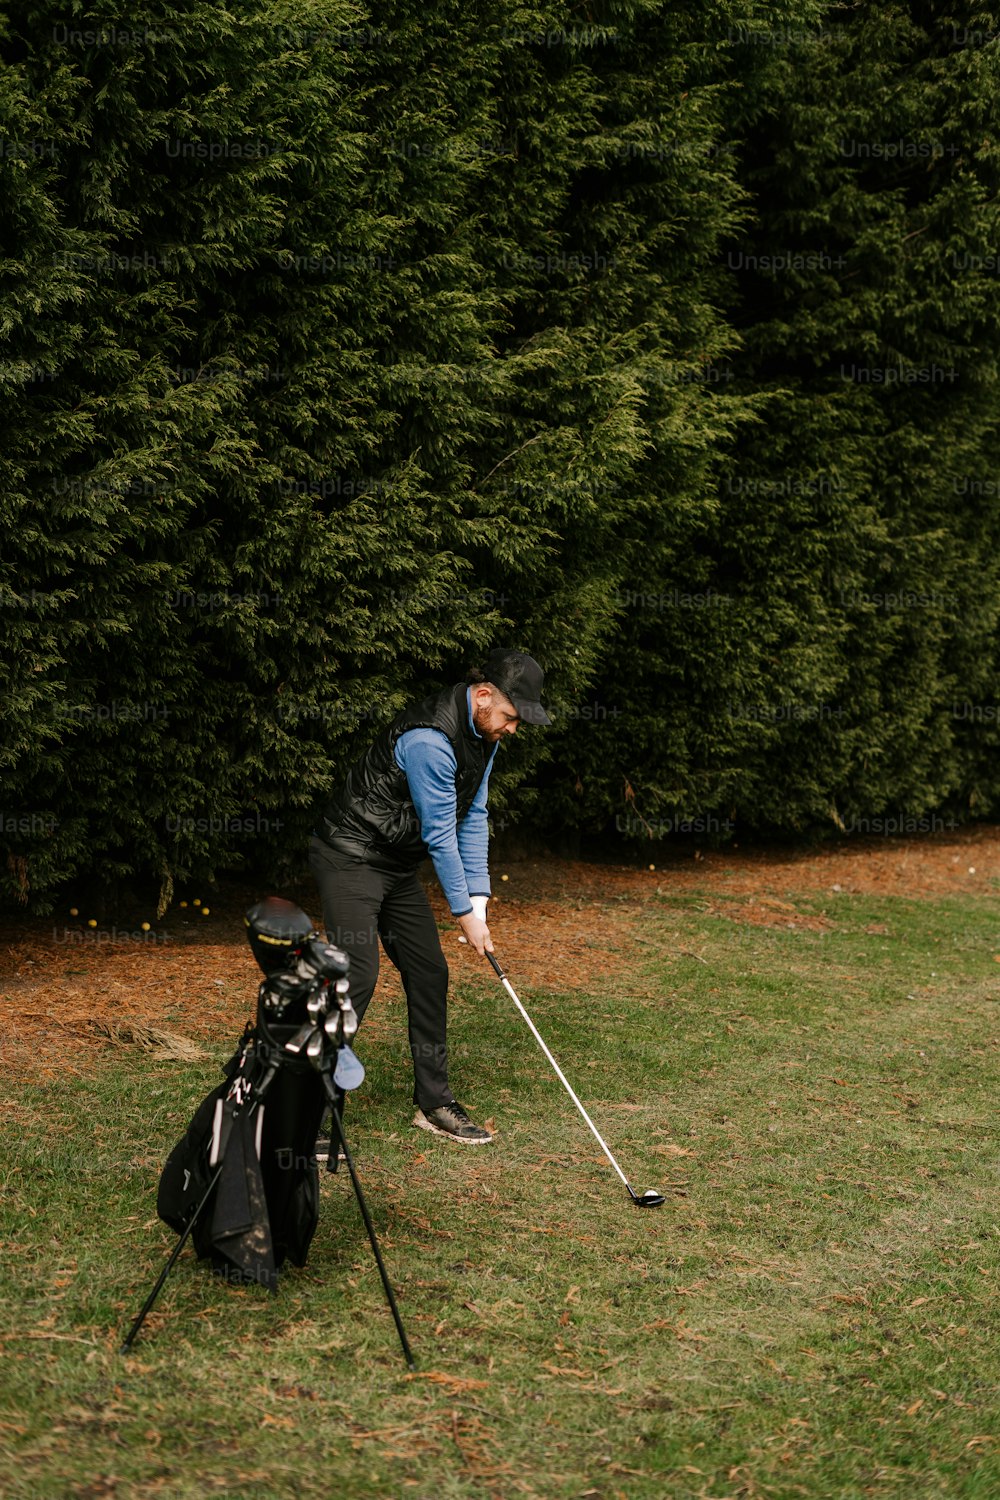 a man is playing golf in the grass